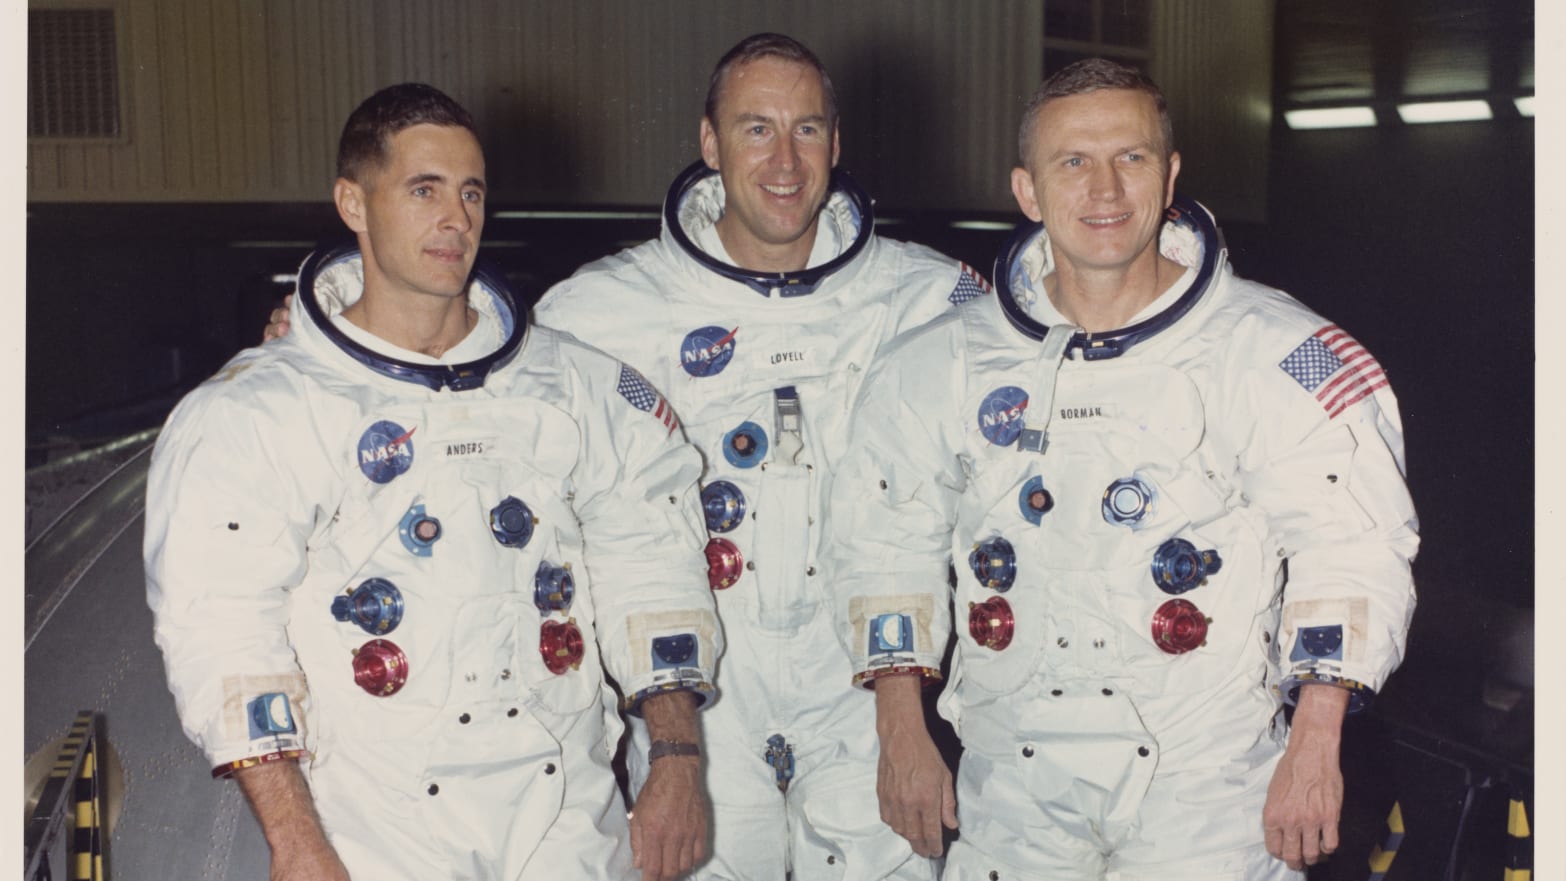 The prime crew of the Apollo 8 mission in 1968. From left to right, they are Lunar Module Pilot William A Anders, Command Module Pilot James A Lovell Jr,  and Commander Frank F Borman II